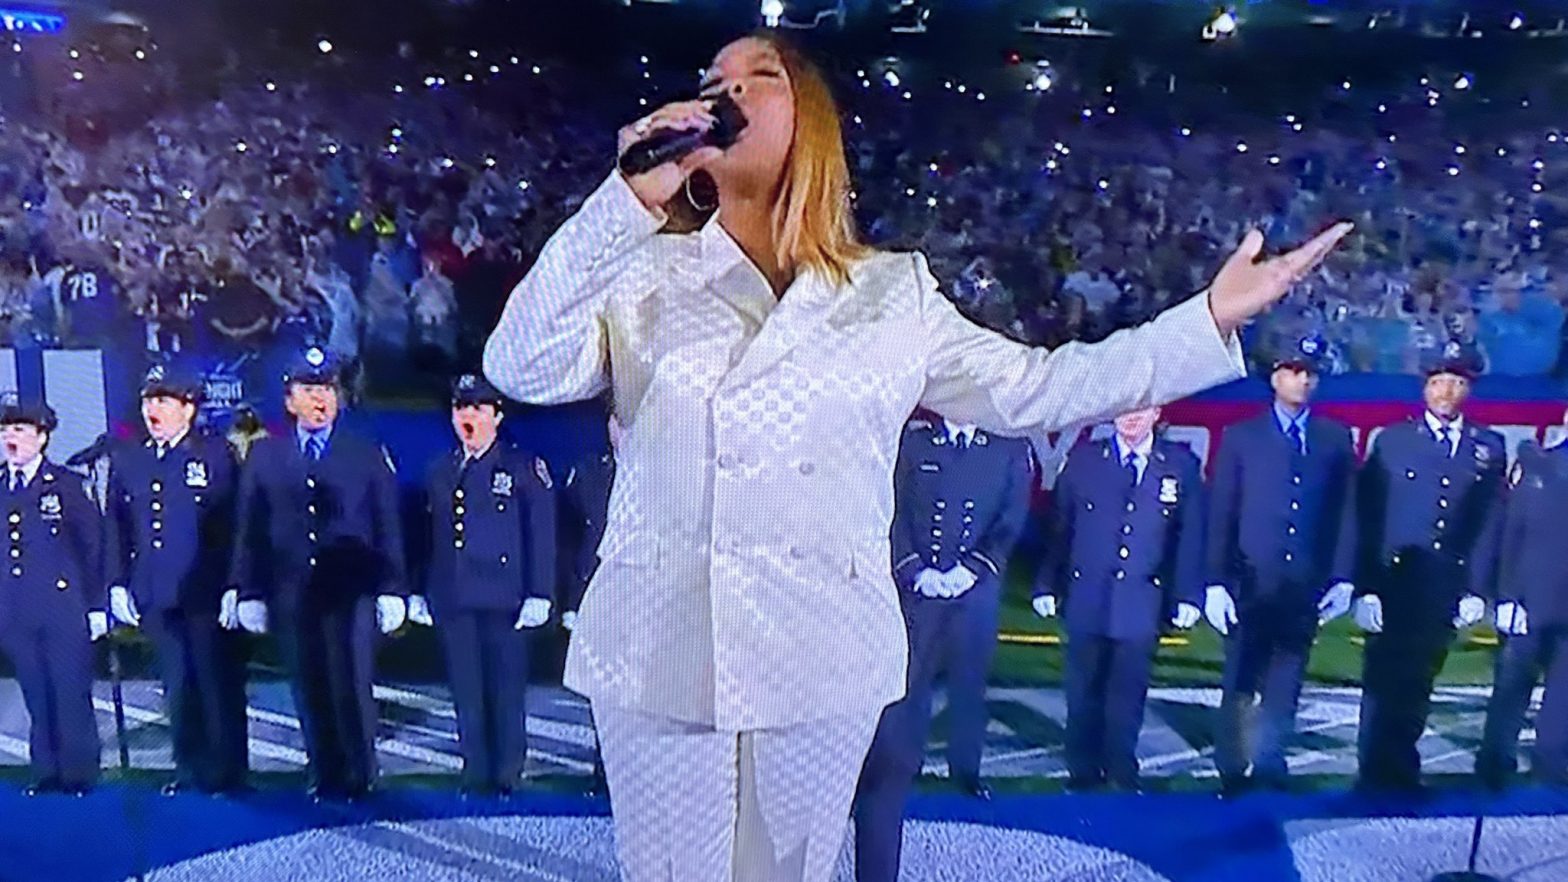 Queen Latifah sings national anthem at New York Giants vs Dallas Cowboys match | Watch video